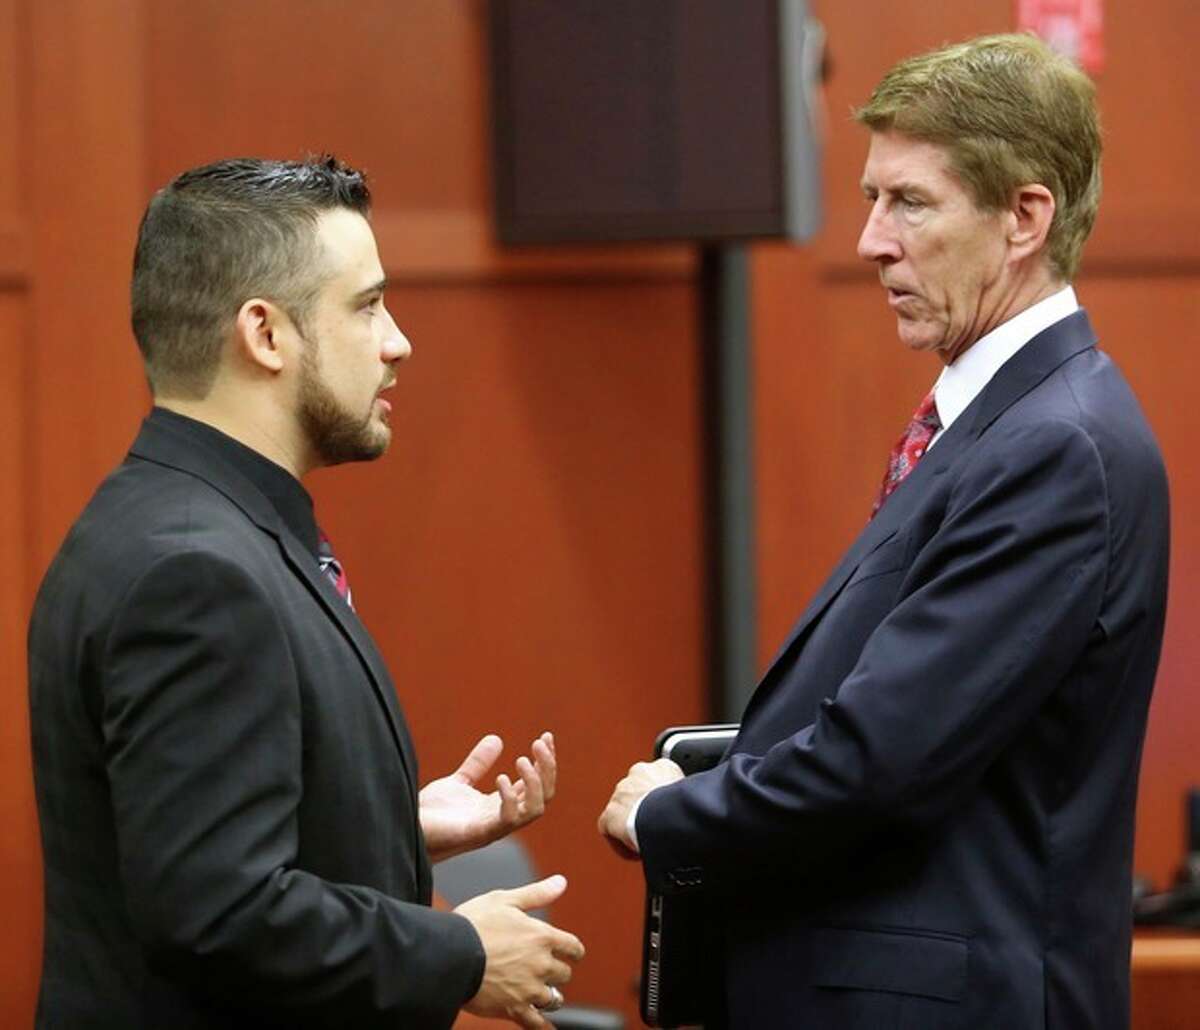 Robert Zimmerman Jr., left, the brother of George Zimmerman, the accused shooter of Trayvon Martin, talks with defense attorney Mark O'Mara, during a pre-trial hearing, Tuesday, May 28, 2013 in Sanford, Fla. George Zimmerman has been charged with second-degree murder for the 2012 shooting death of Trayvon Martin. He was not in court for the hearing. (AP Photo/Orlando Sentinel, Joe Burbank, Pool)